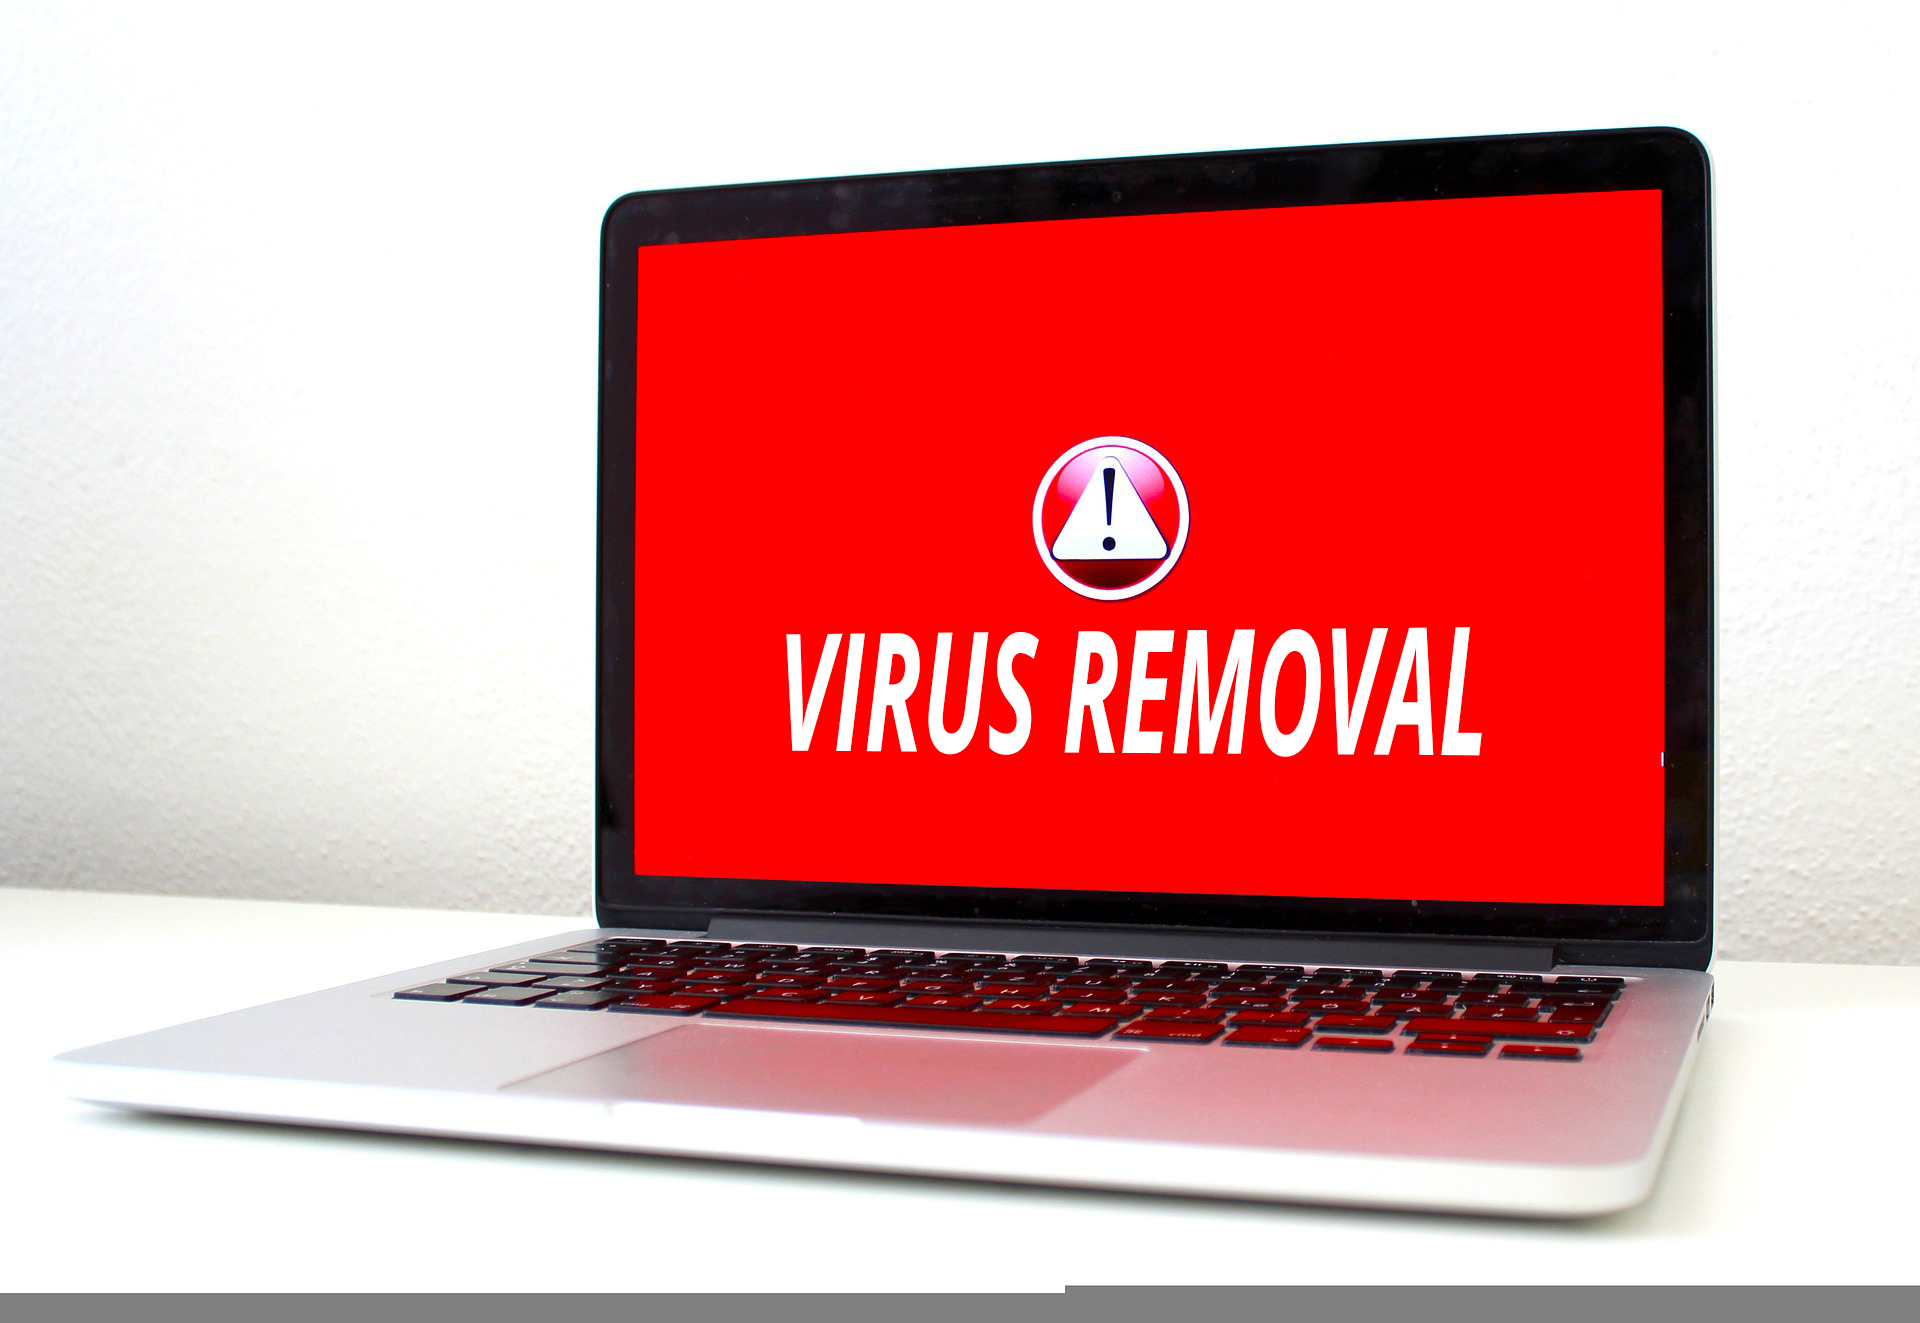 Computer Virus Removal